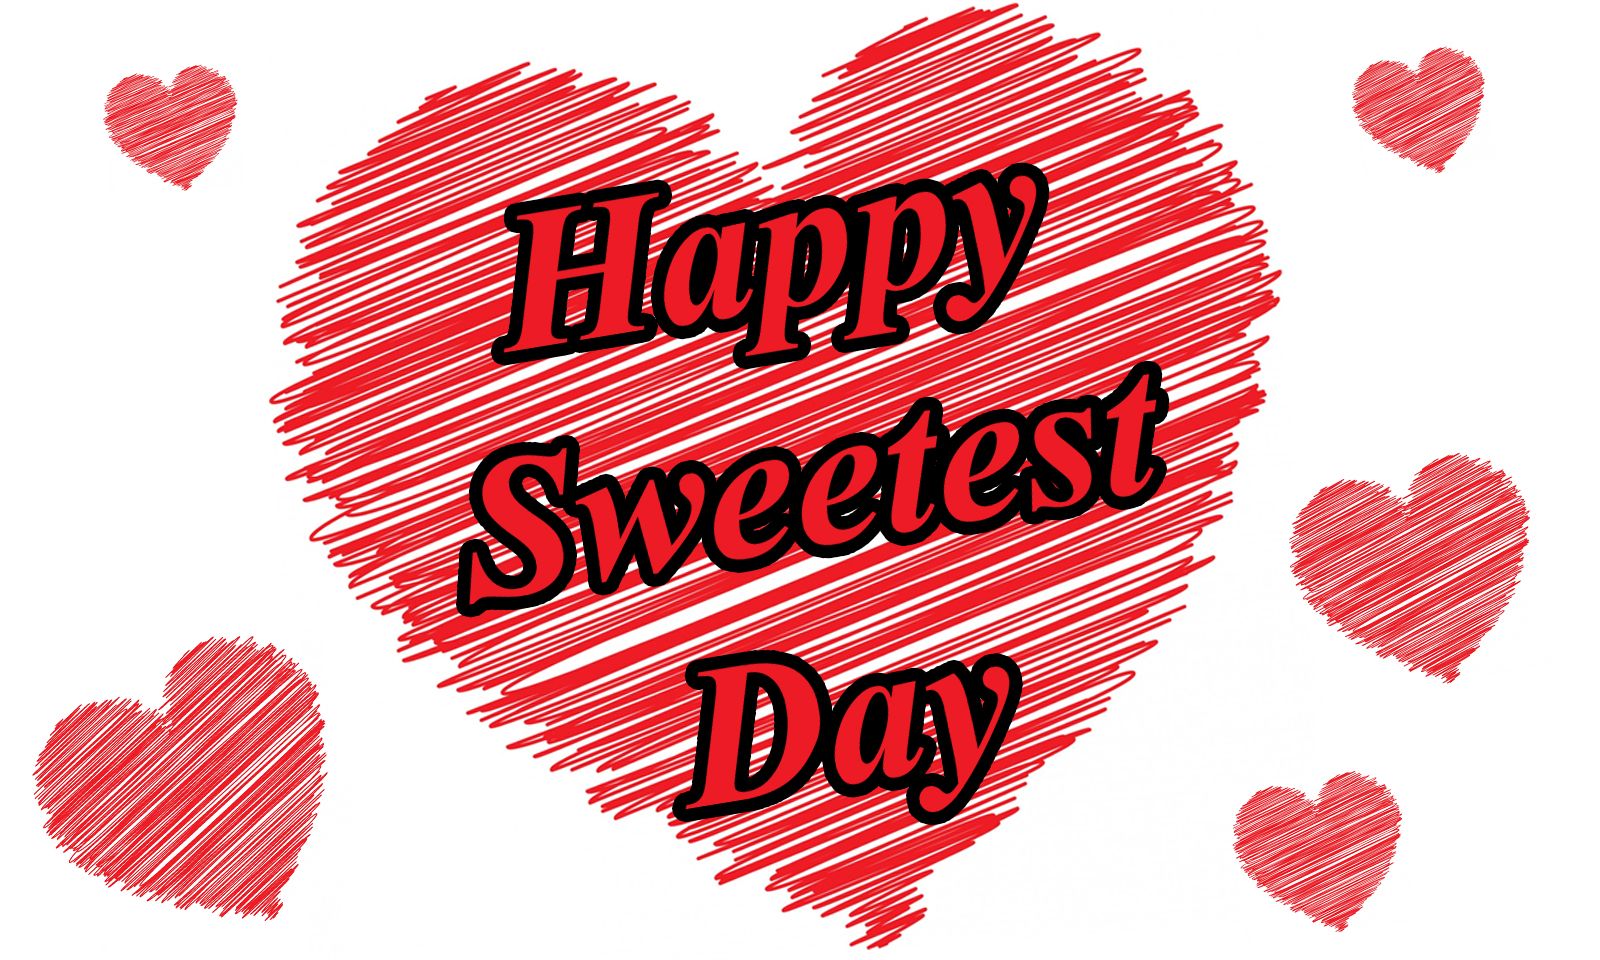 sweetest-day-hd-wallpapers-images-photos-pictures-free-download